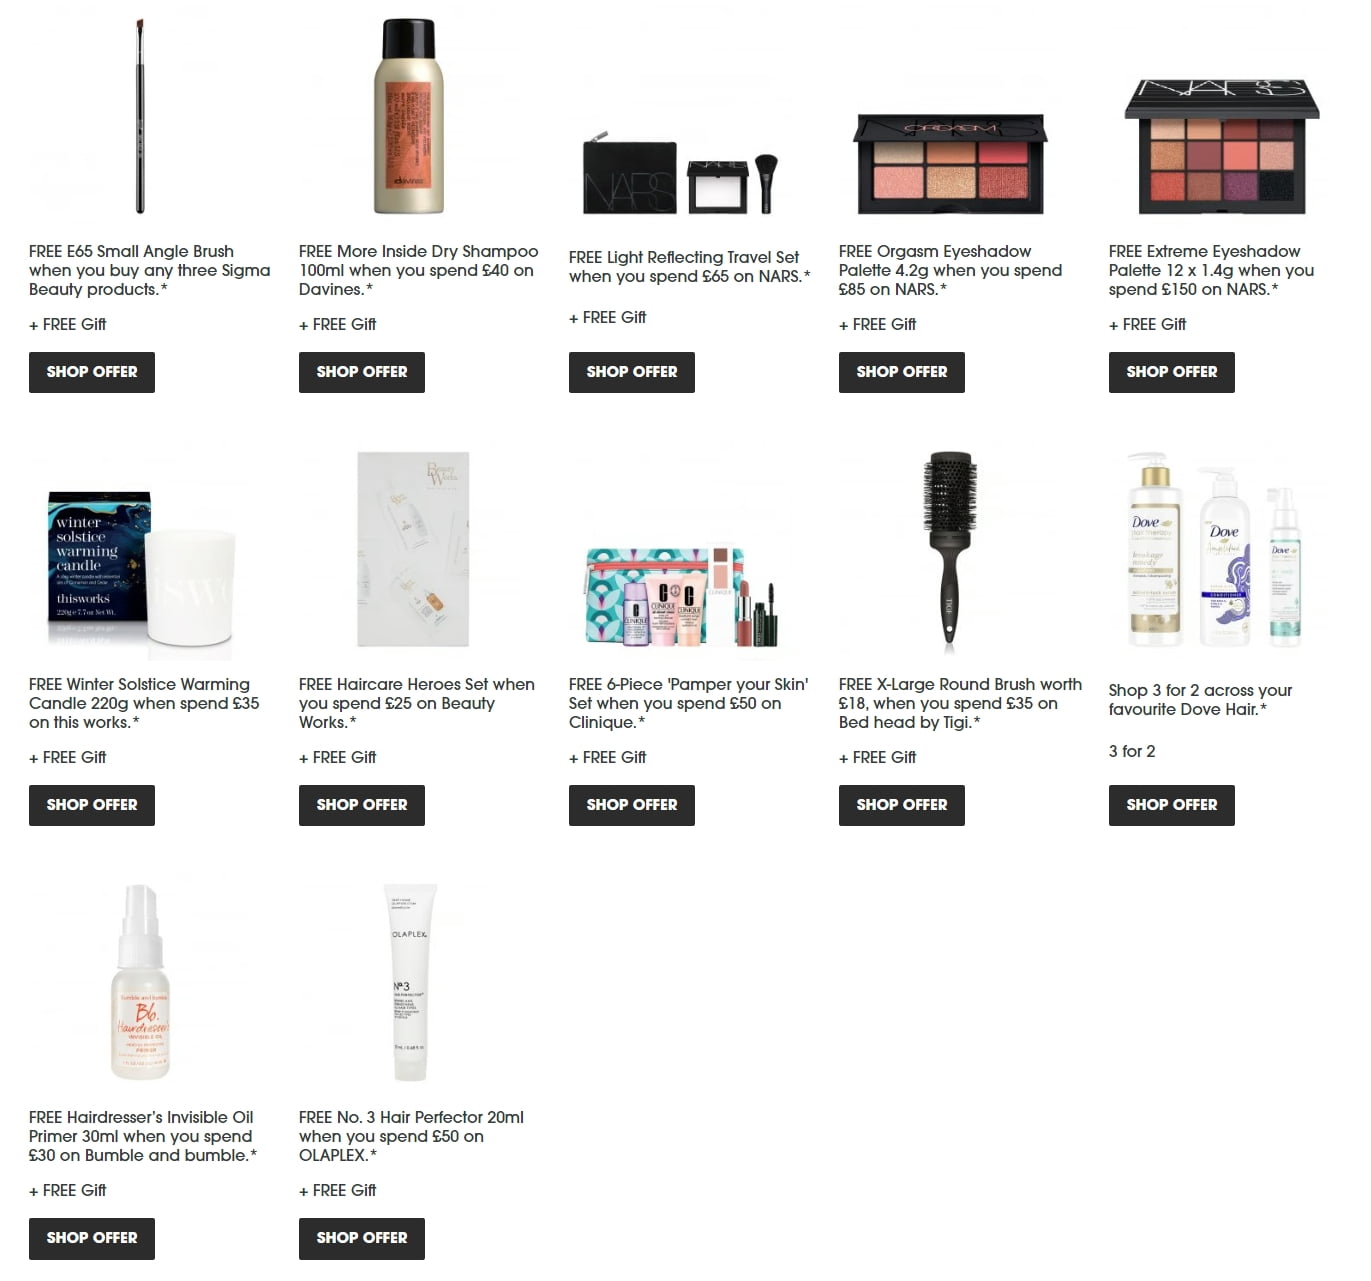 New gift with purchase offers at Sephora UK